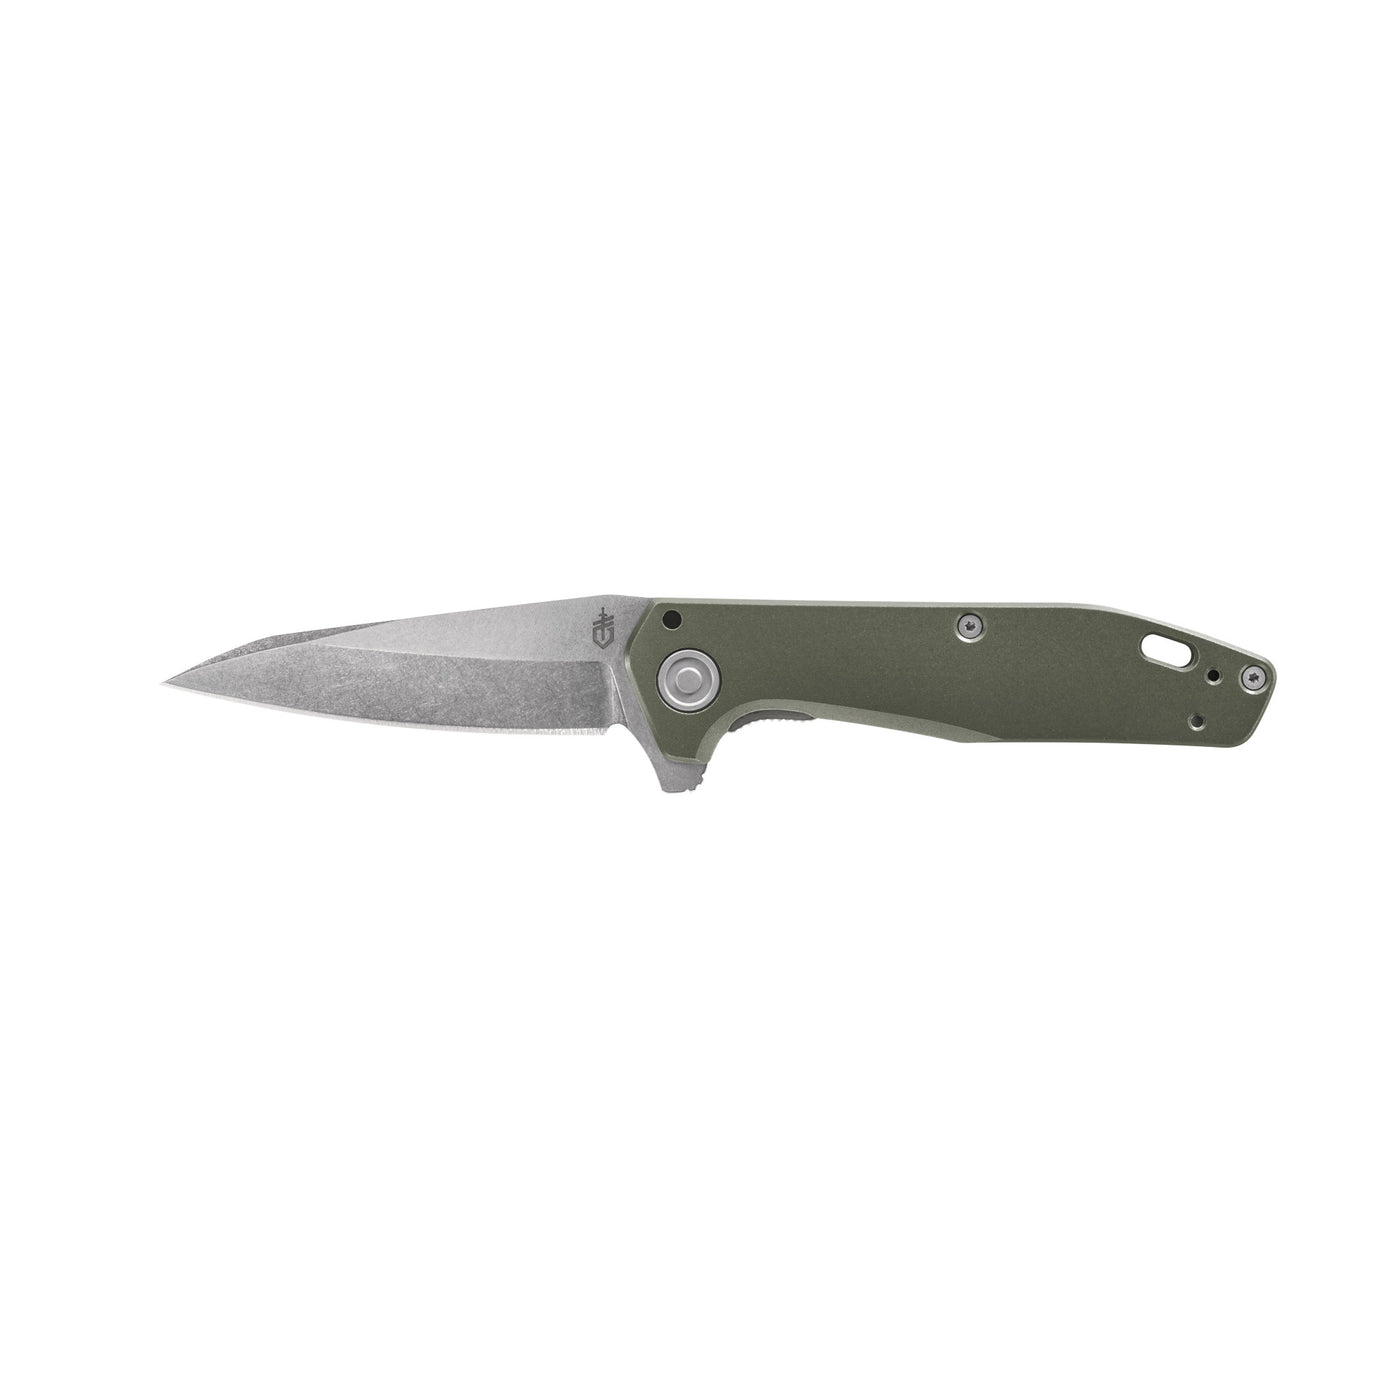 Fastball Wharncliffe